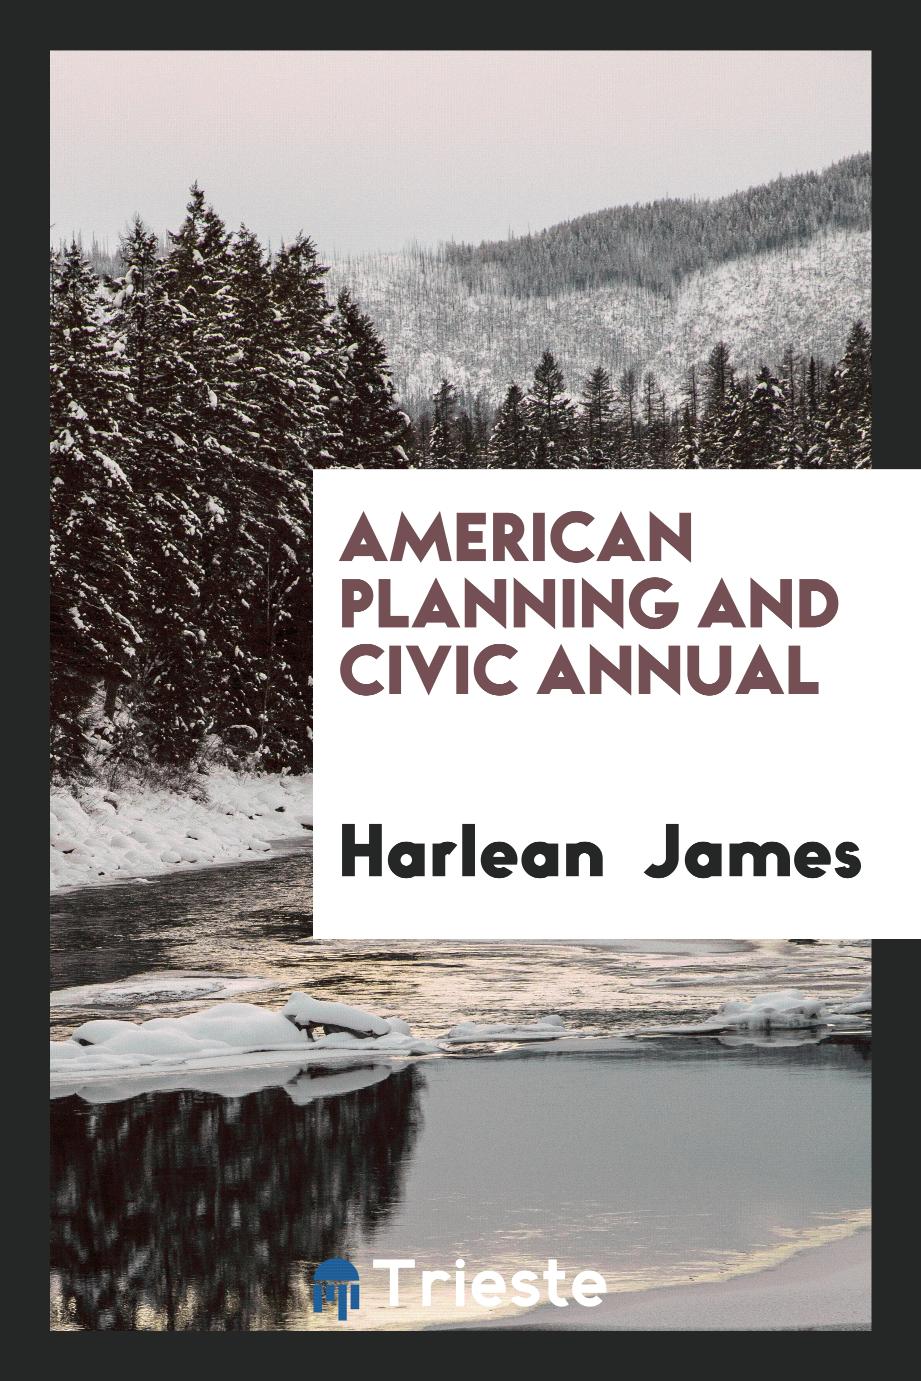 American planning and civic annual